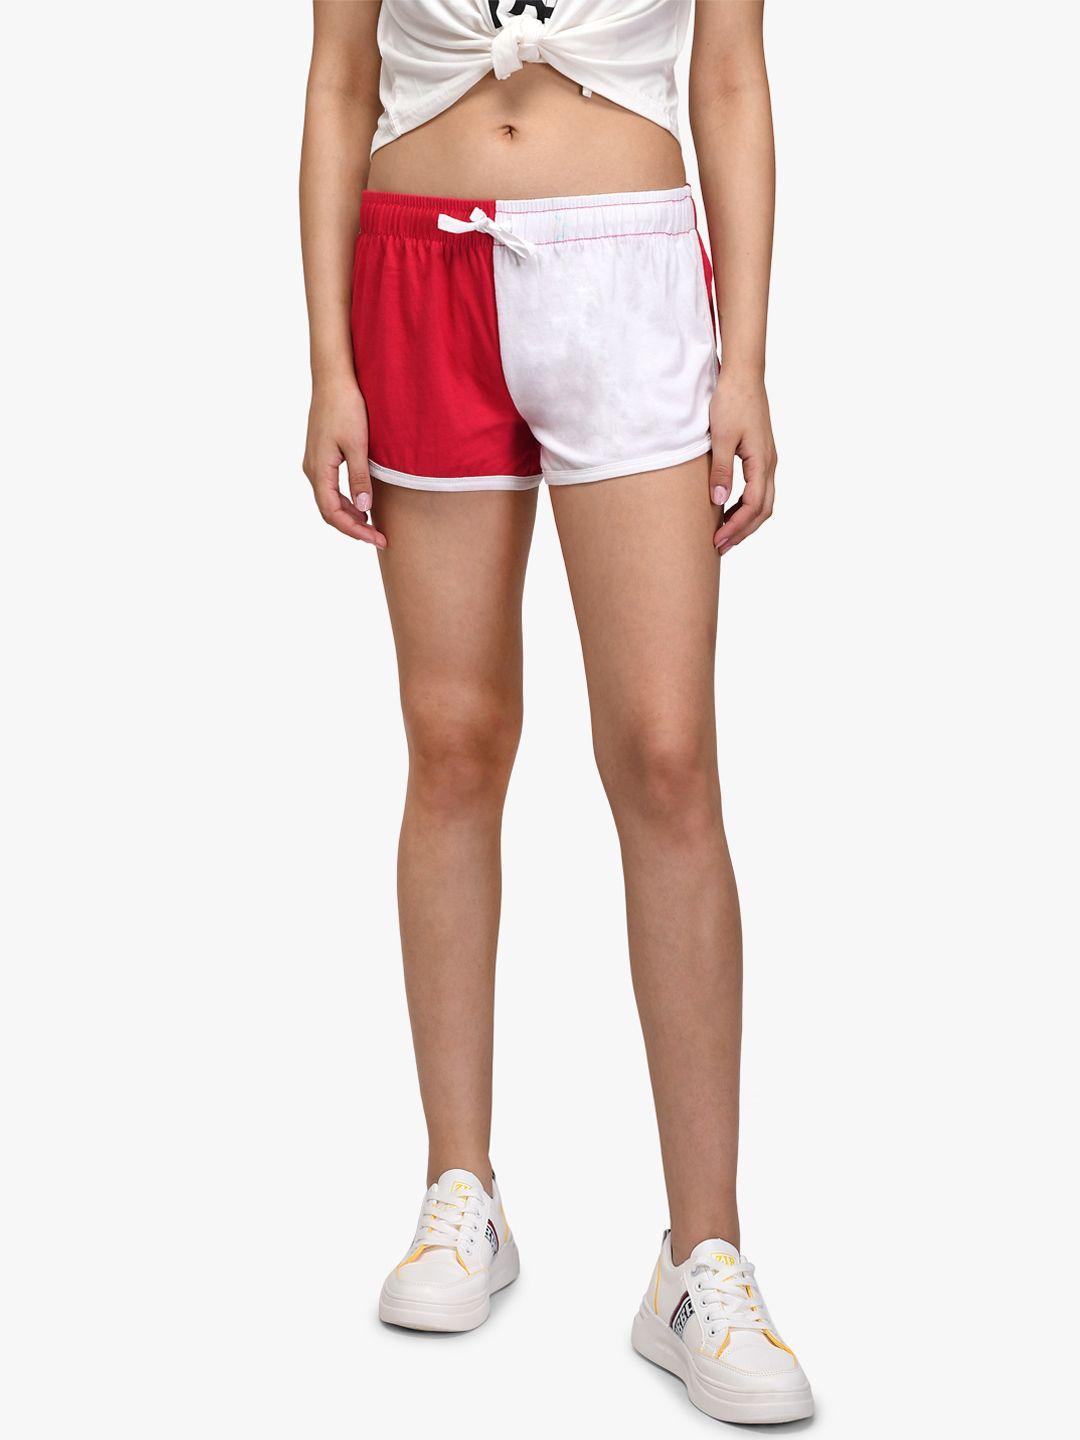 kotty women red and white colourblocked regular fit hot pants